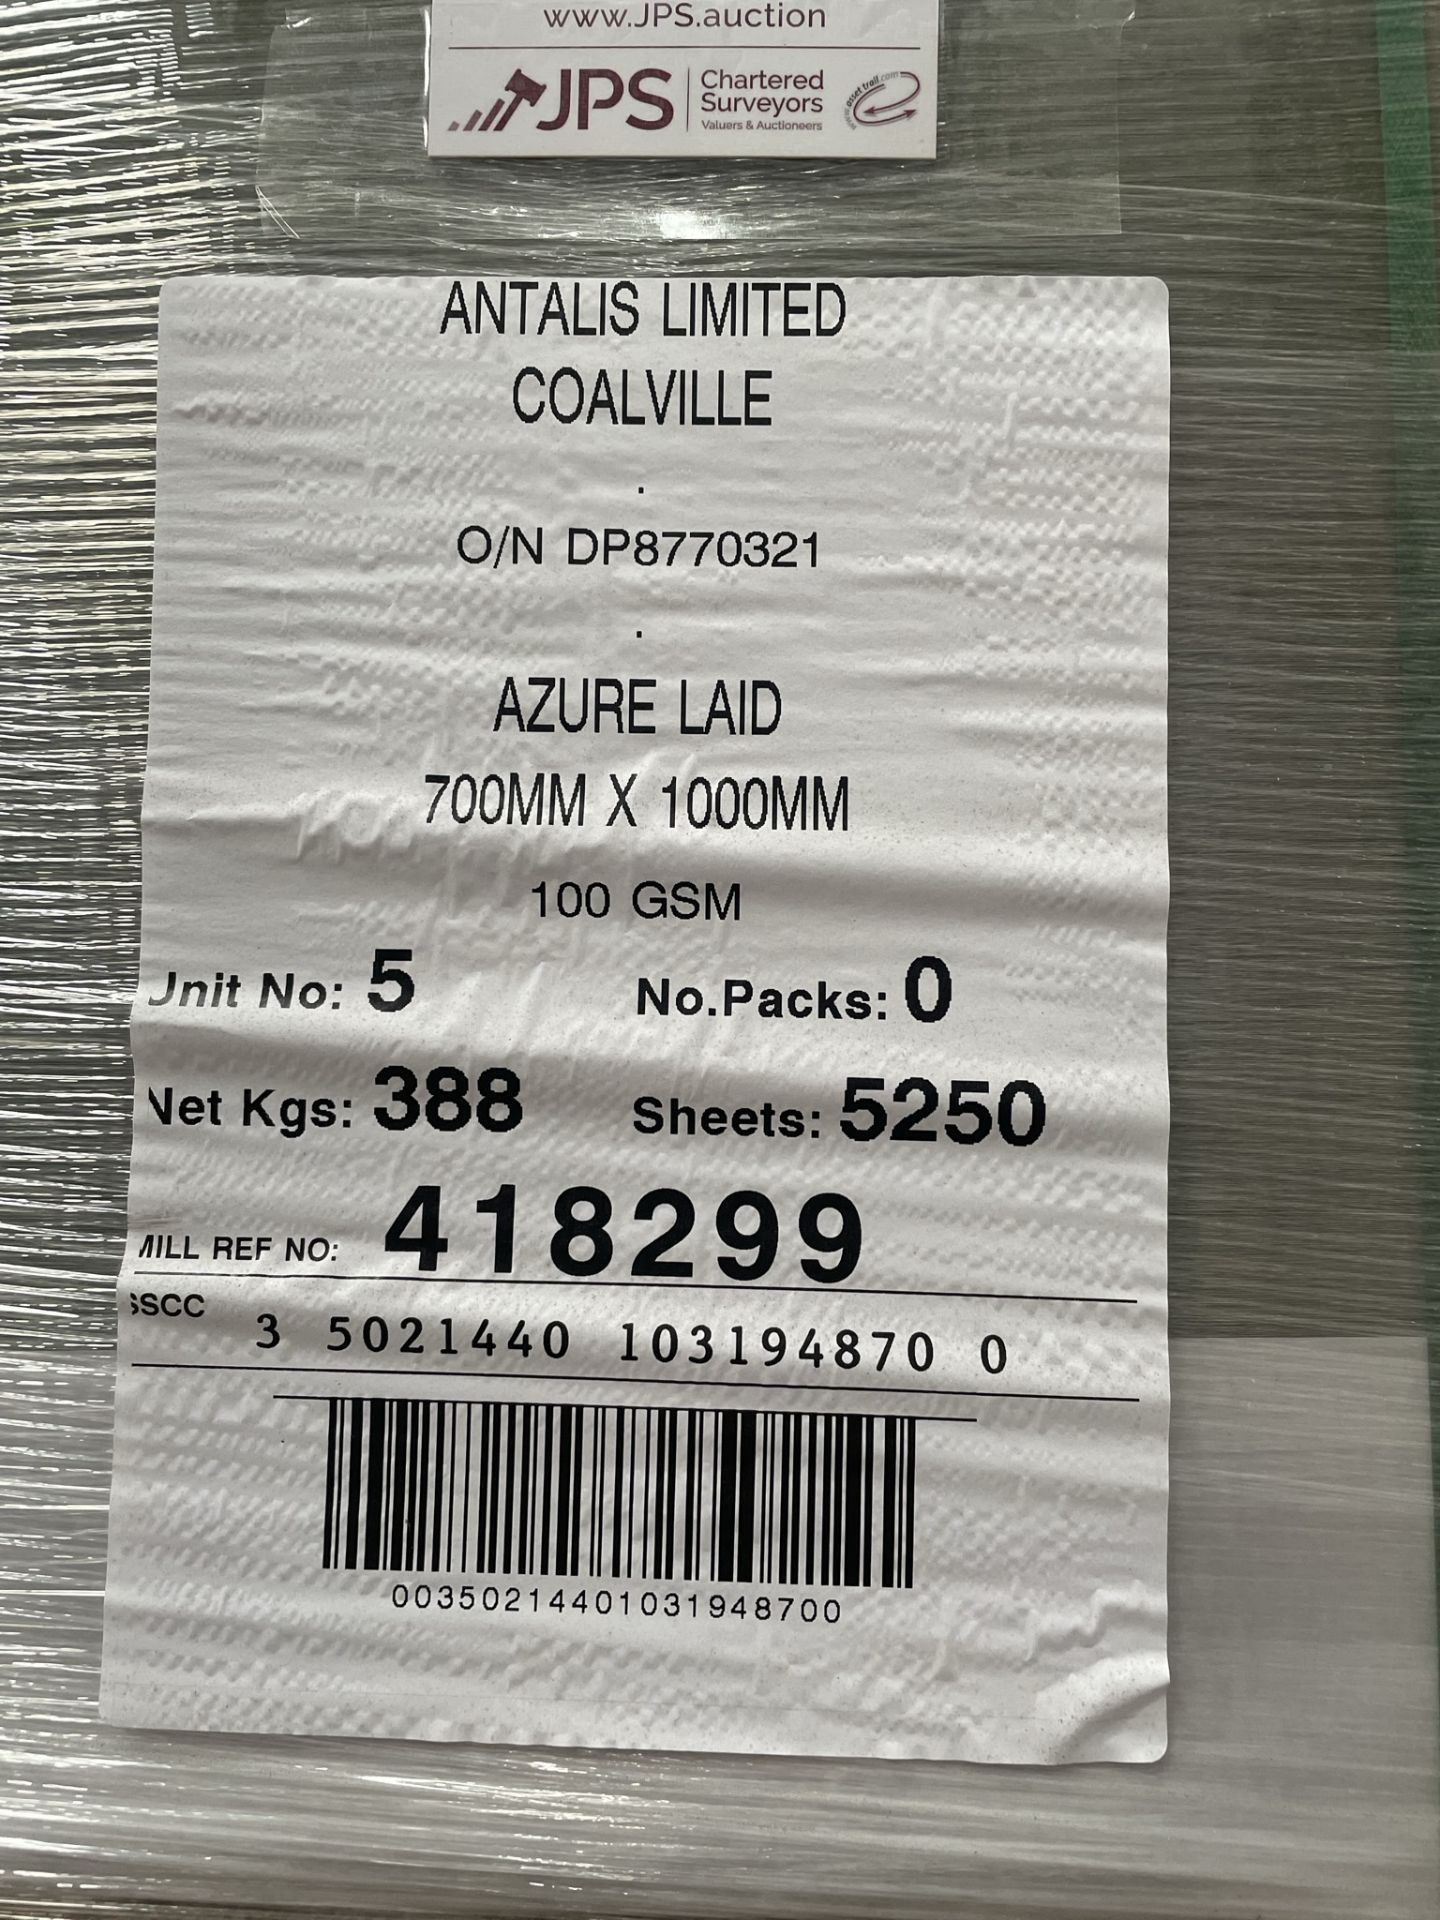 4 x Pallets of Azure Laid 100GSM Paper | 70 x 100cm | Approx 18,550 Sheets in Total - Image 4 of 4